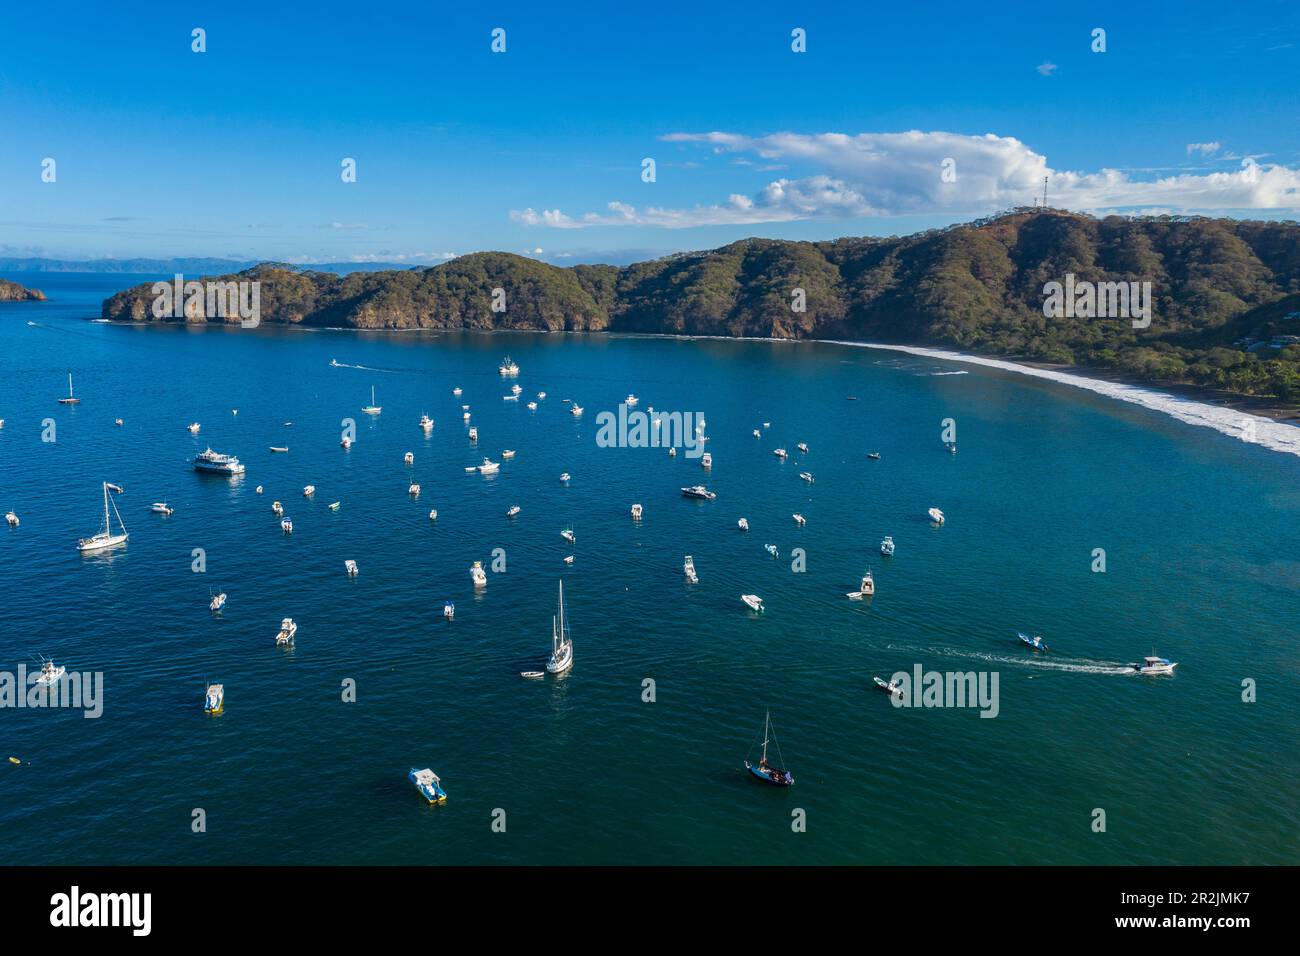 Aerial view of sailboats in bay with coastline behind, Playas del Coco, Guanacaste, Costa Rica, Central America Stock Photo